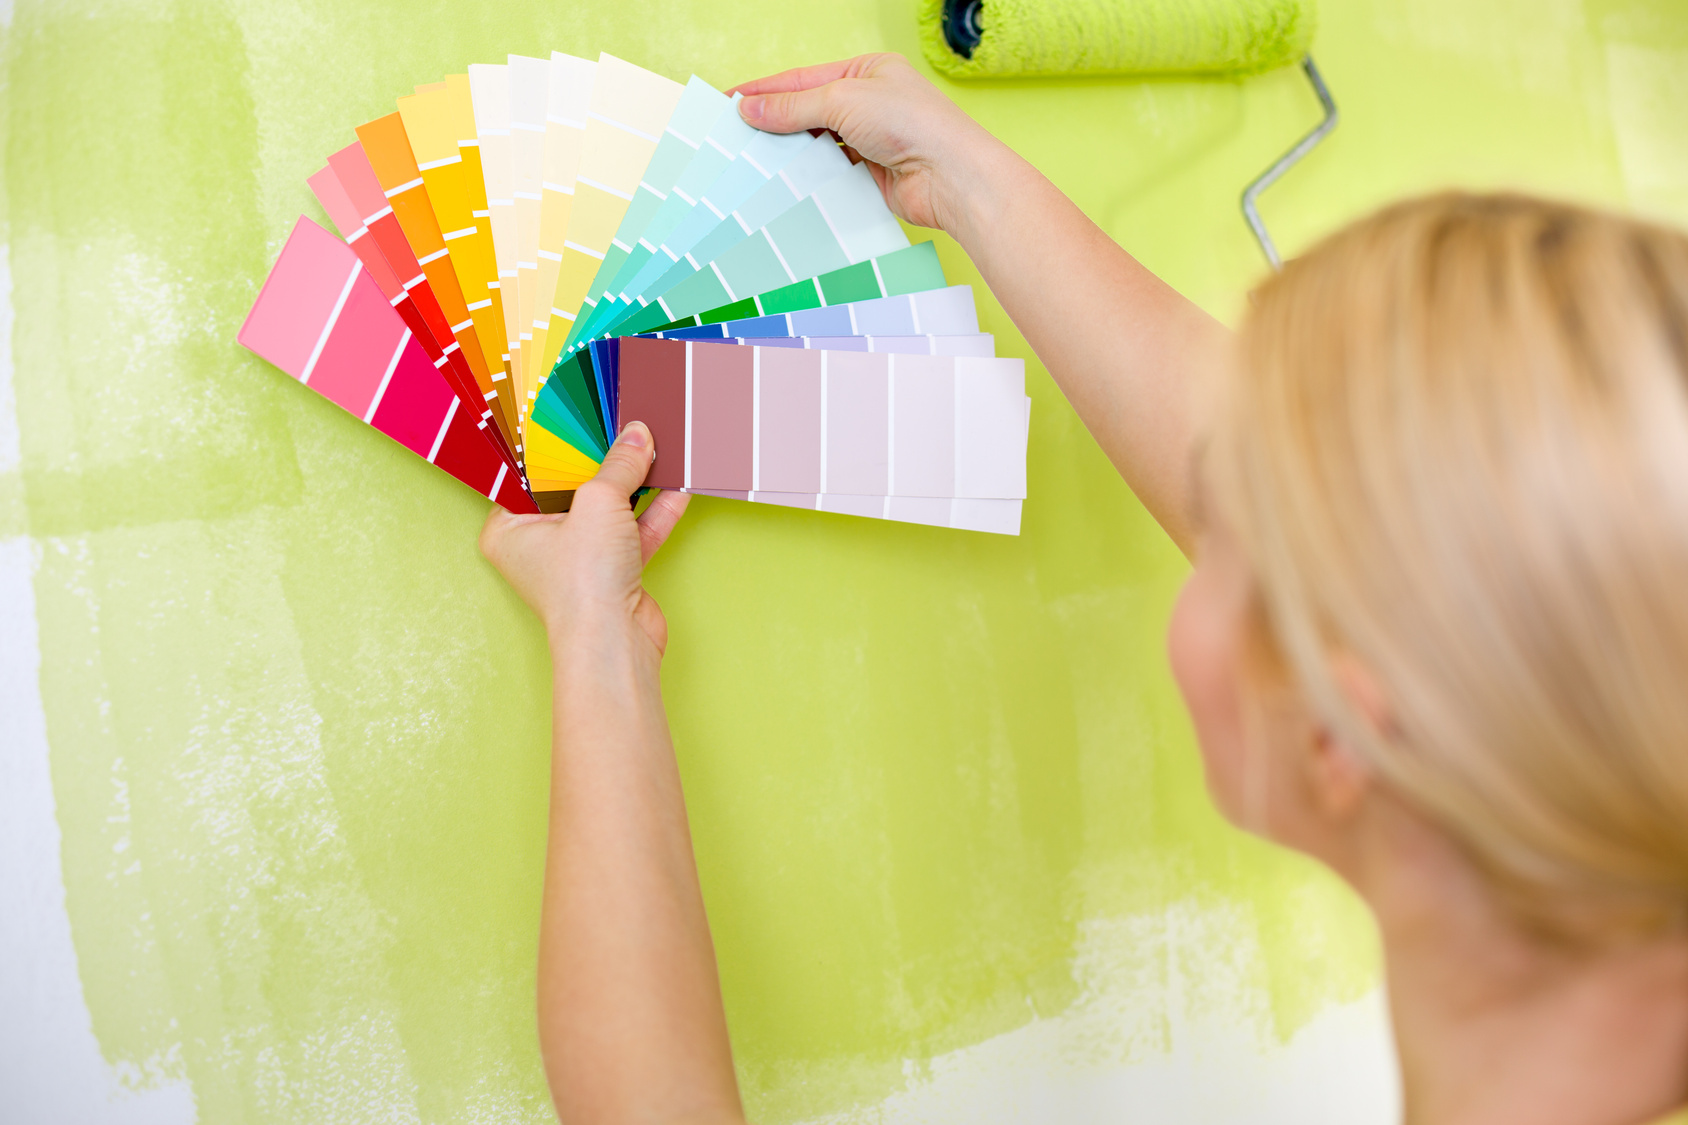 Picking the right paint will make a house your home.